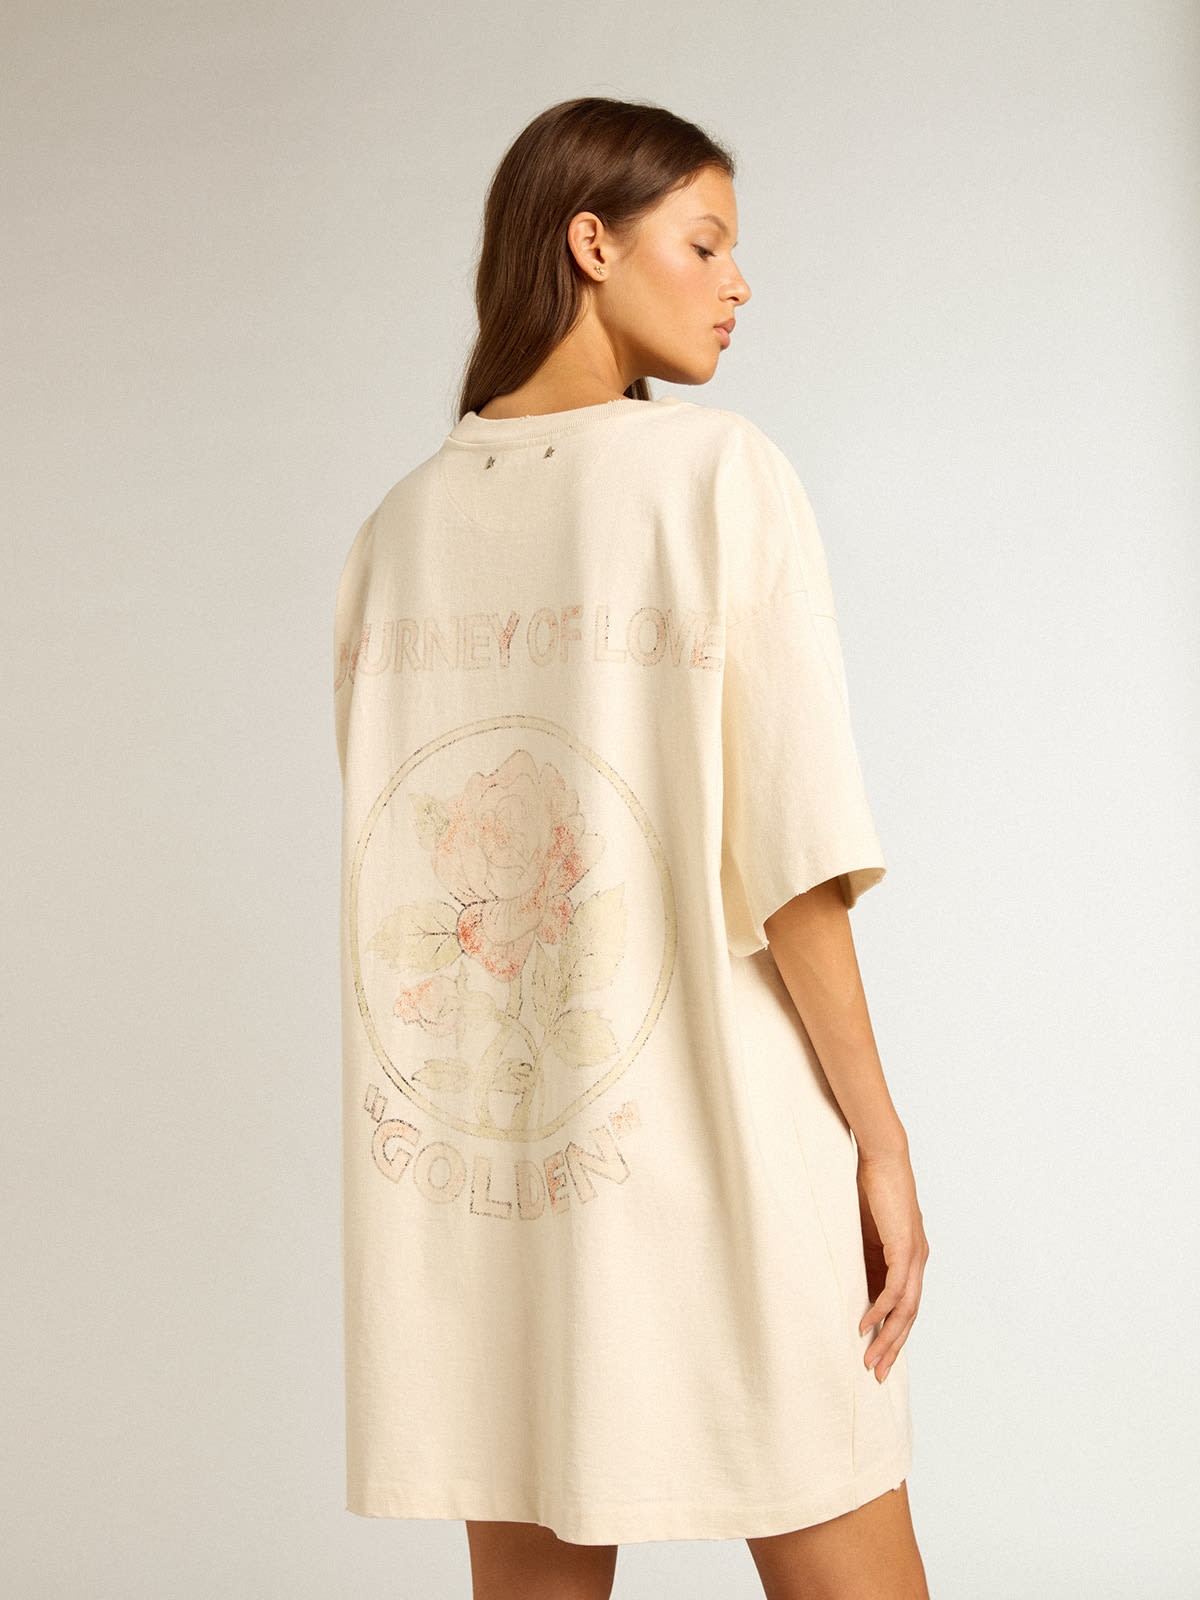 Aged white cotton T-shirt dress with embroidered design - 4